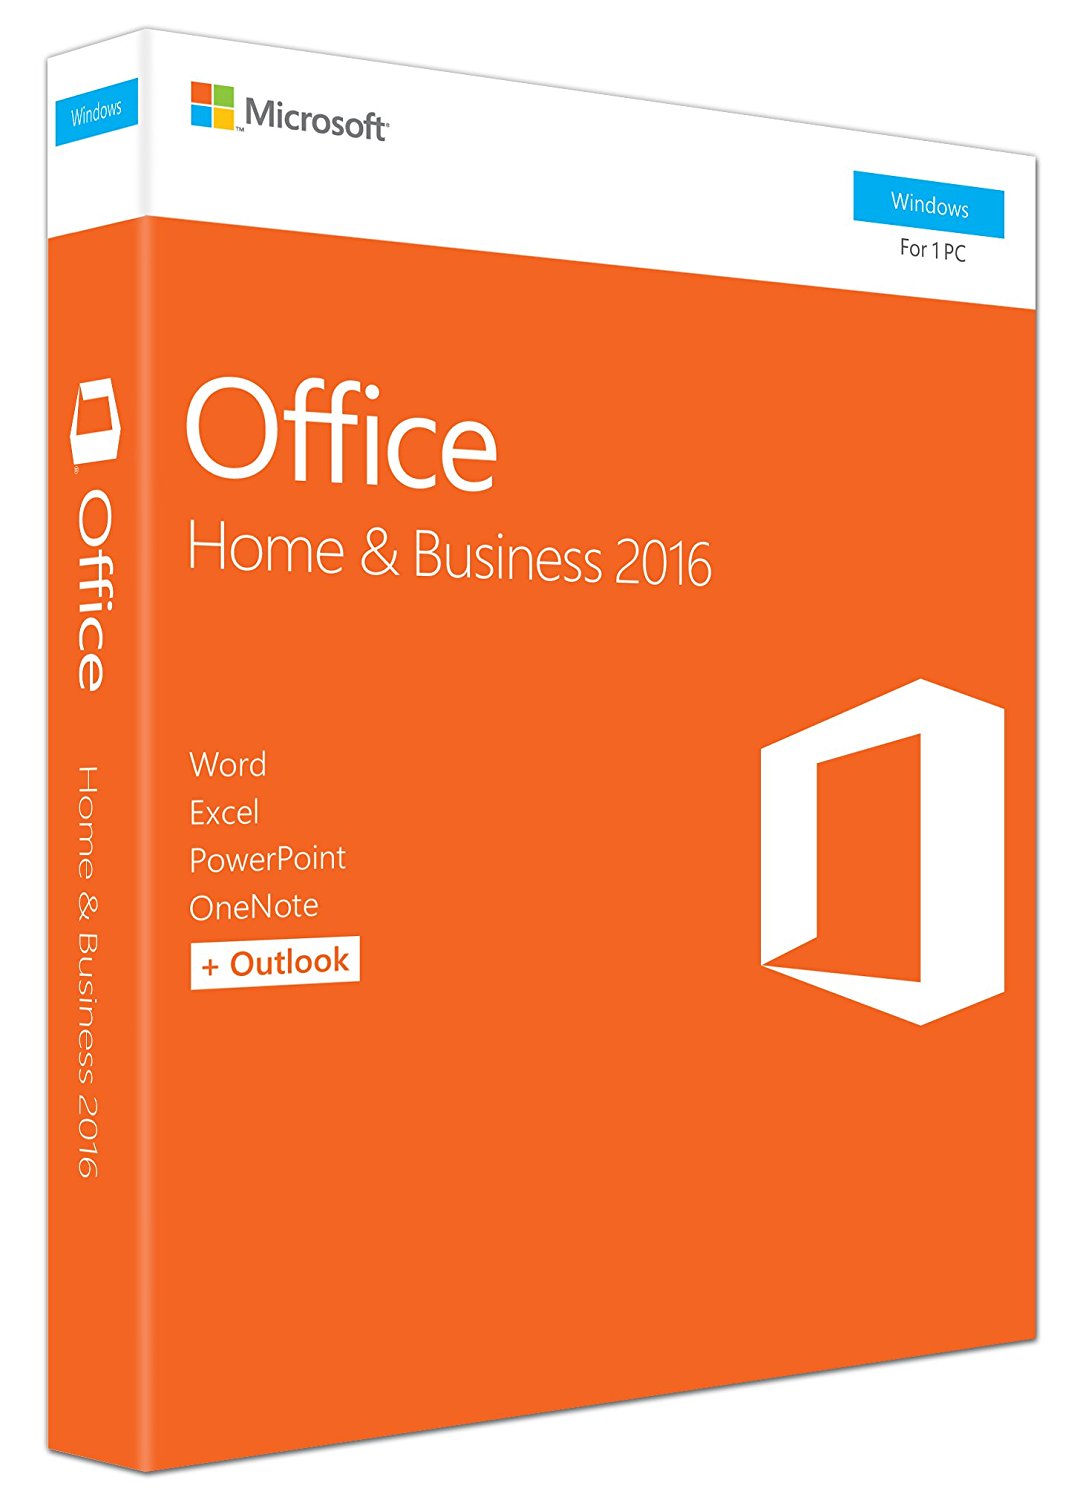 MS Office 2016 cheap license